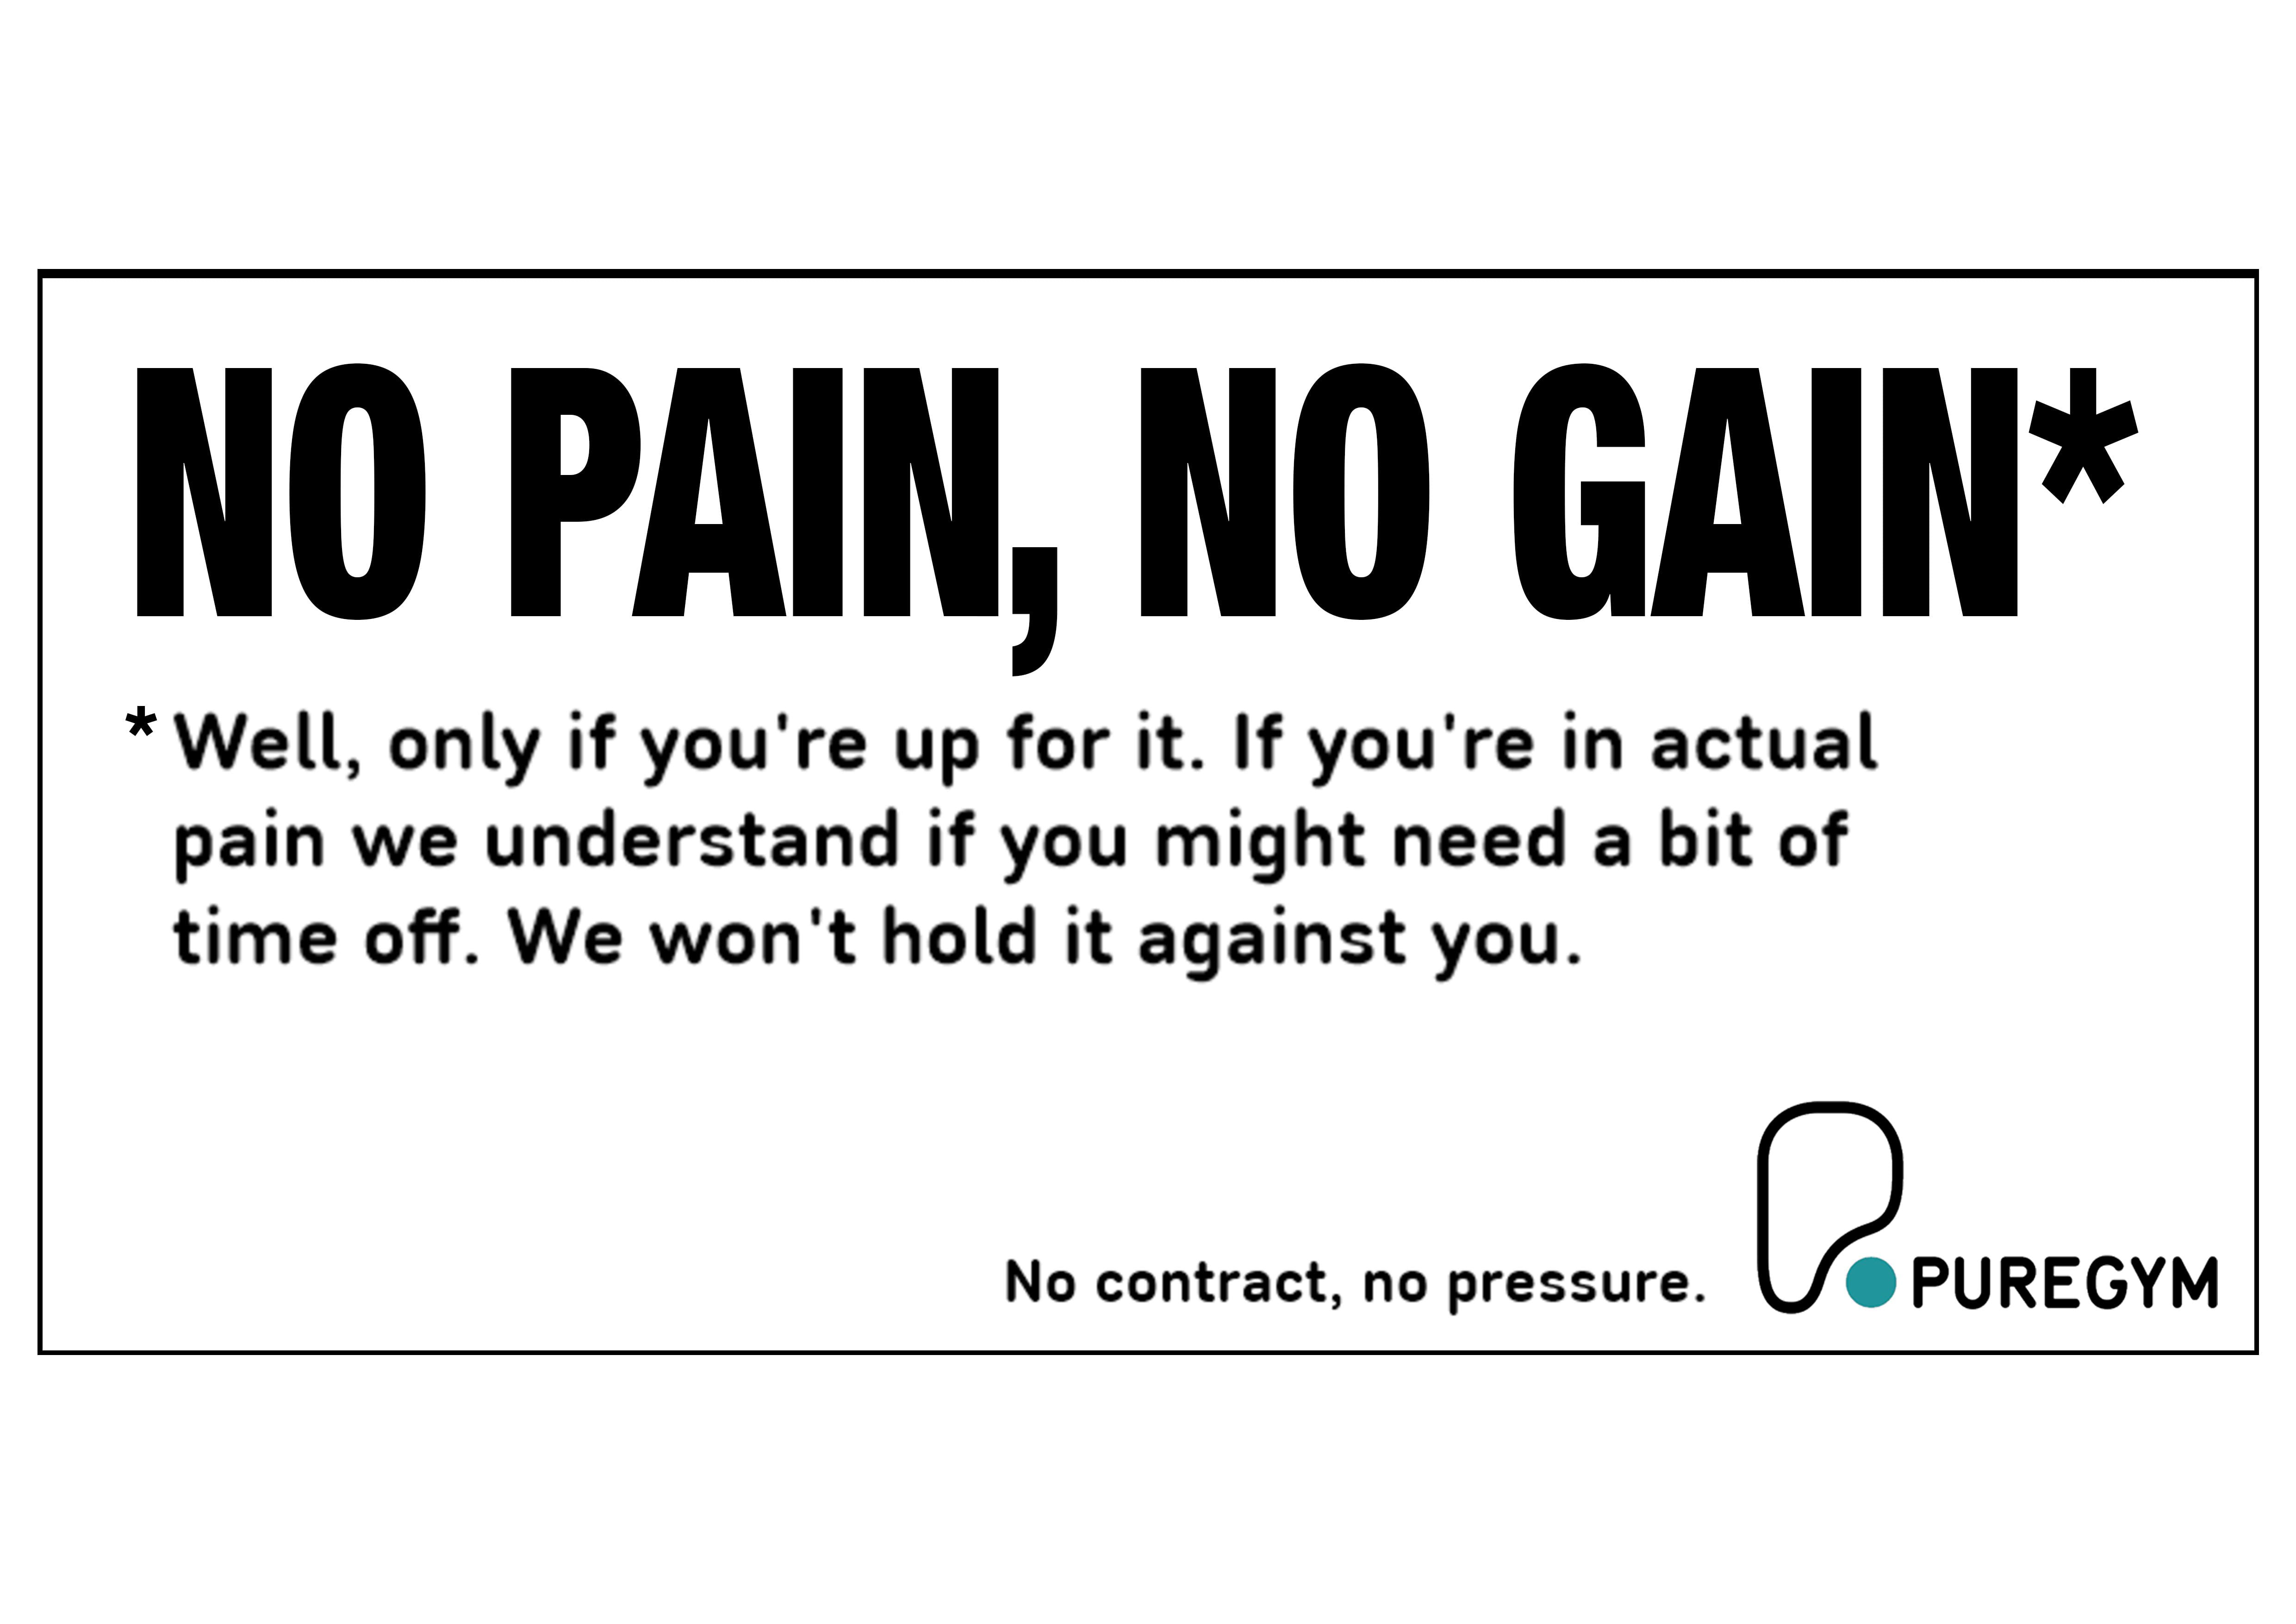 PureGym Billboard ad that reads: No pain, no gain